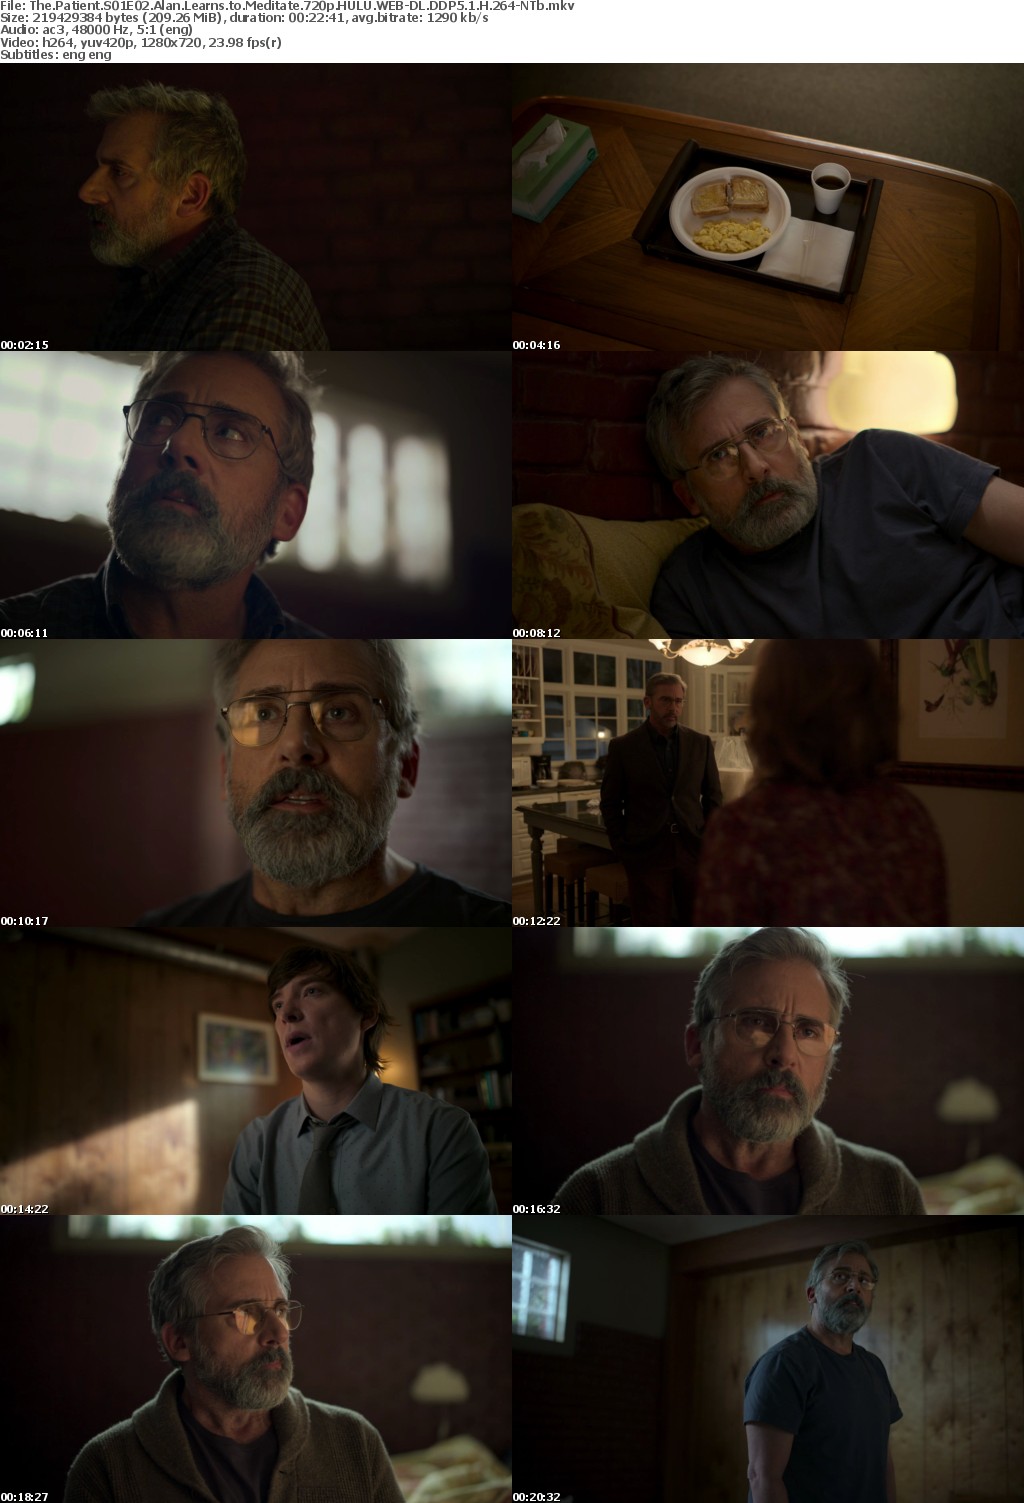 The Patient S01E02 Alan Learns to Meditate 720p HULU WEBRip DDP5 1 x264-NTb